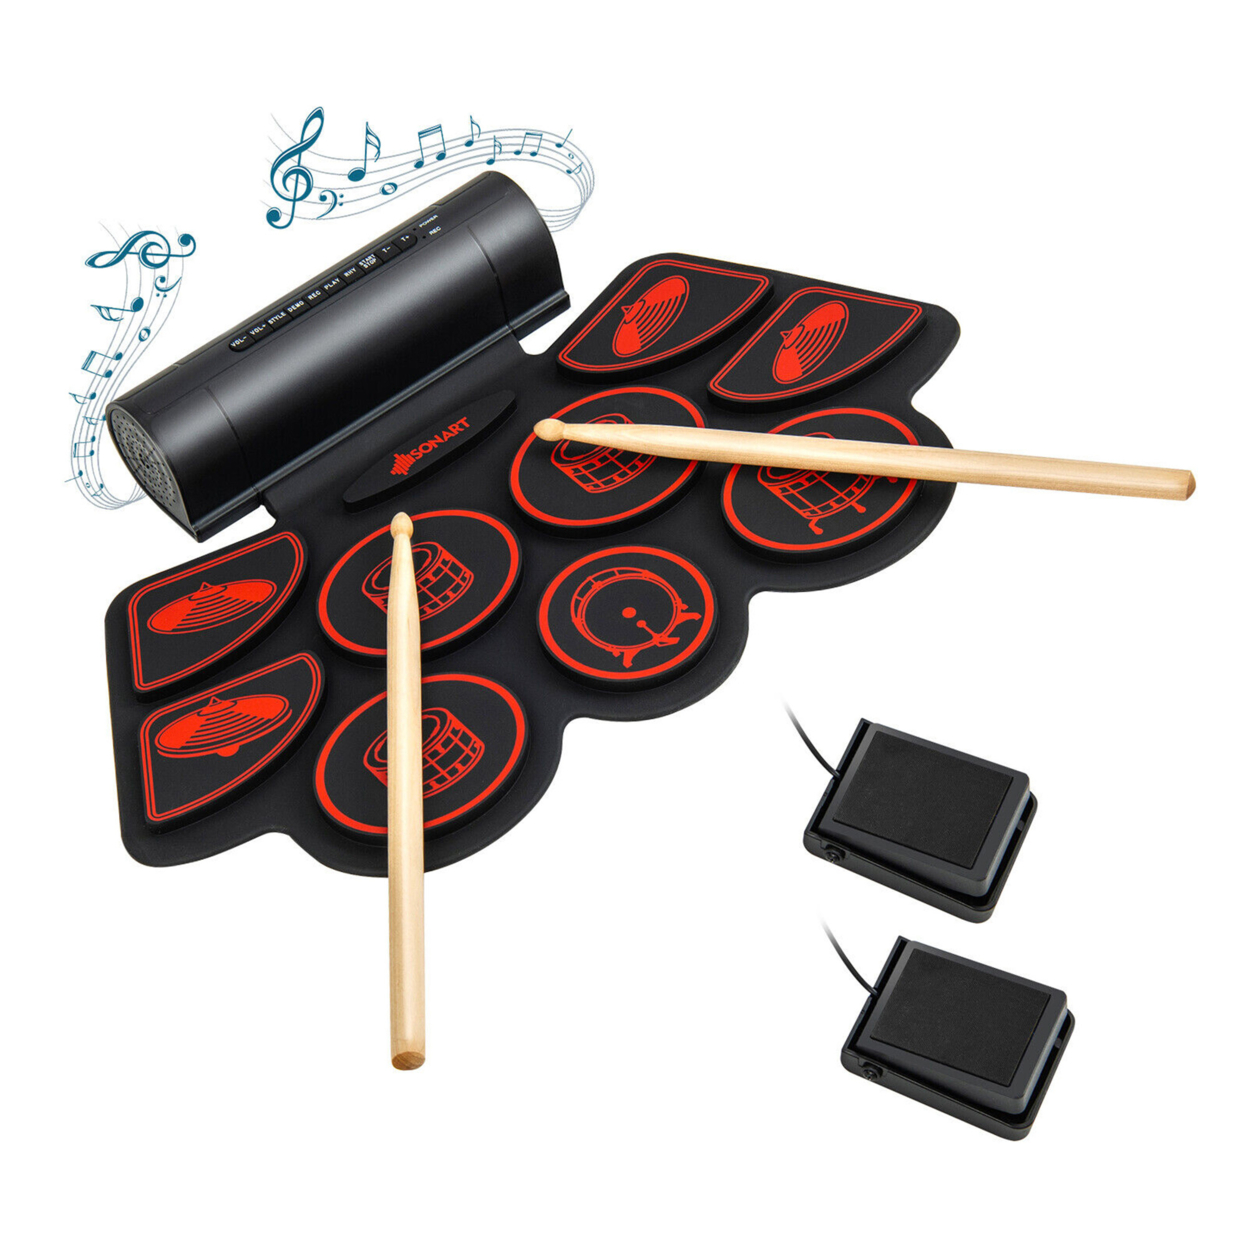 9 Pads Electronic Drum Set Roll Up Drum Kit W/ MIDI & Dual Stereo Speakers - Red+Black